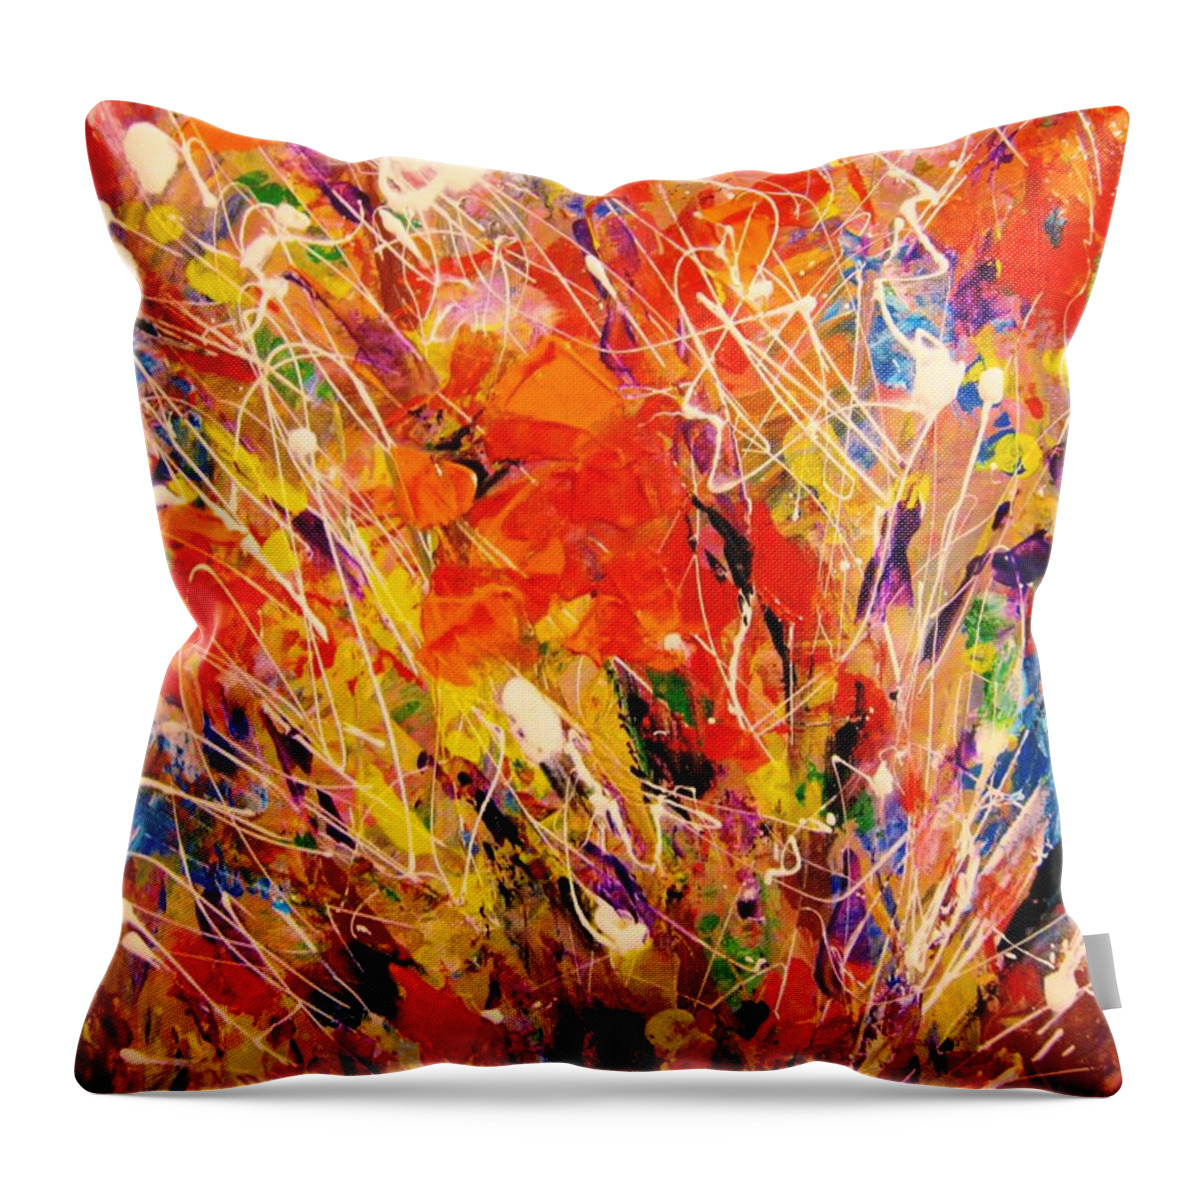 Healing Energy Spiritual Contemporary Art Throw Pillow featuring the painting ColorScape 15 by Helen Kagan